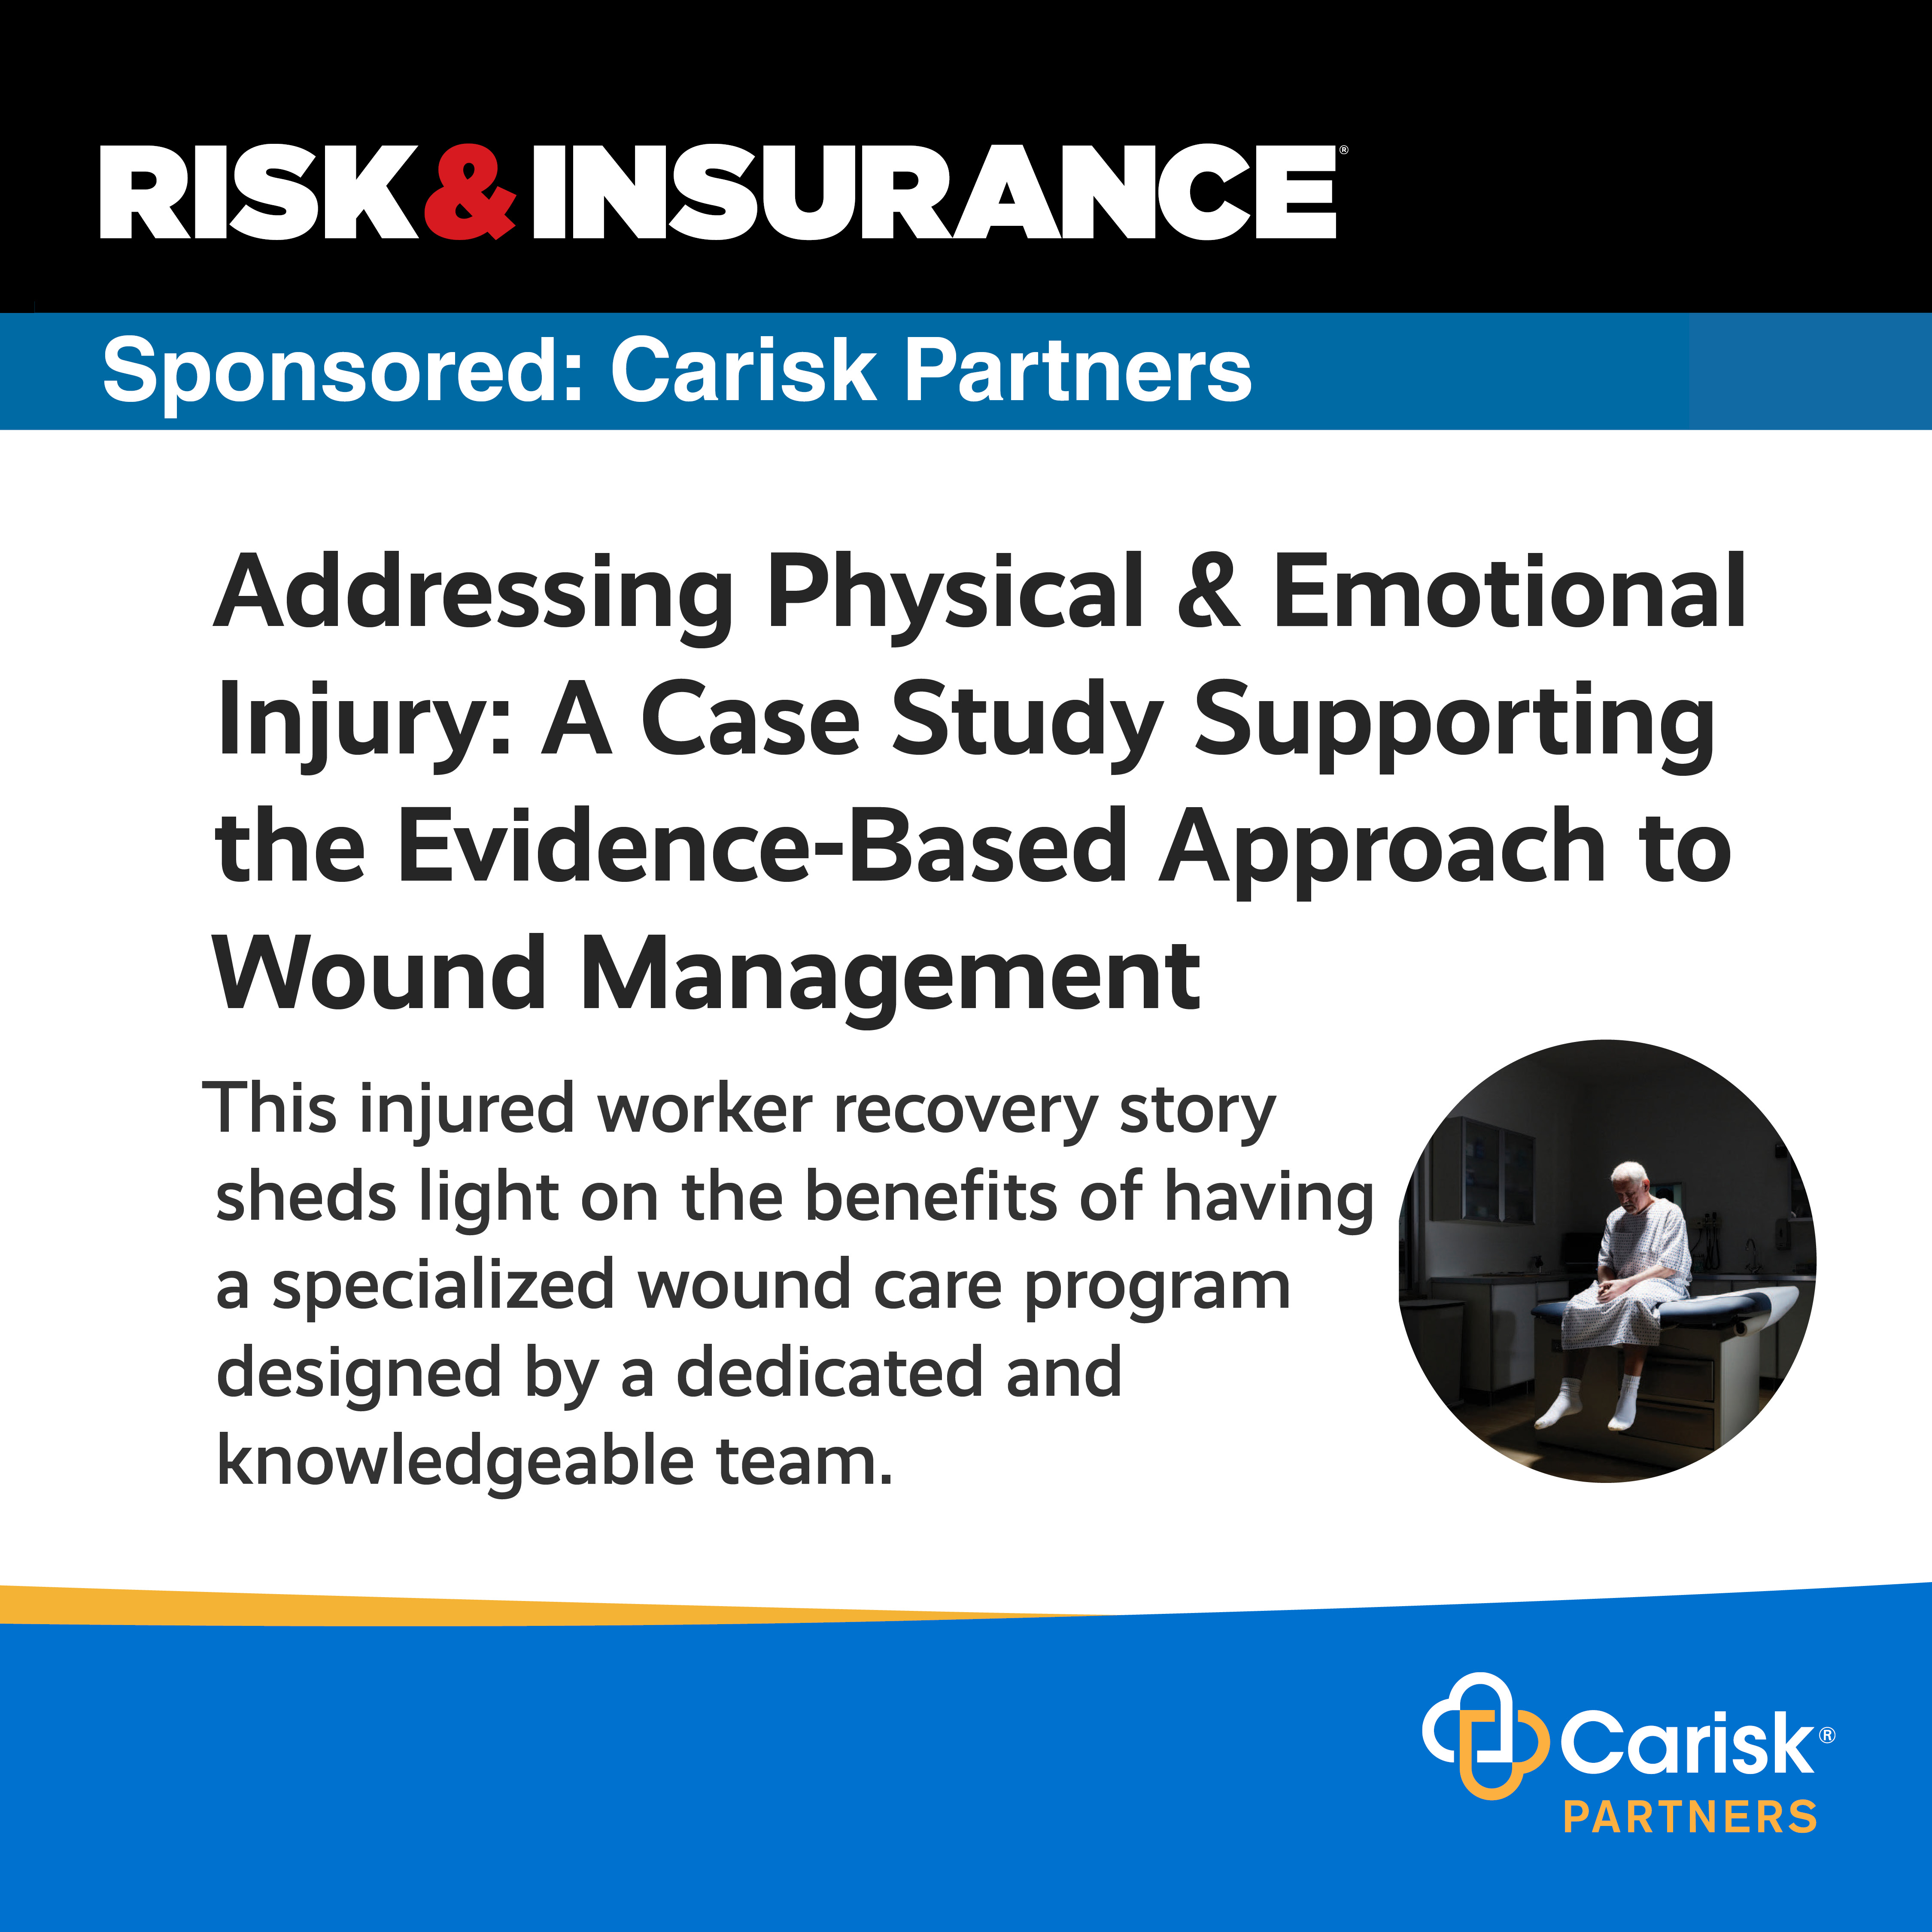 Addressing Physical & Emotional Injury: A Case Study Supporting the Evidence-Based Approach to Wound Management